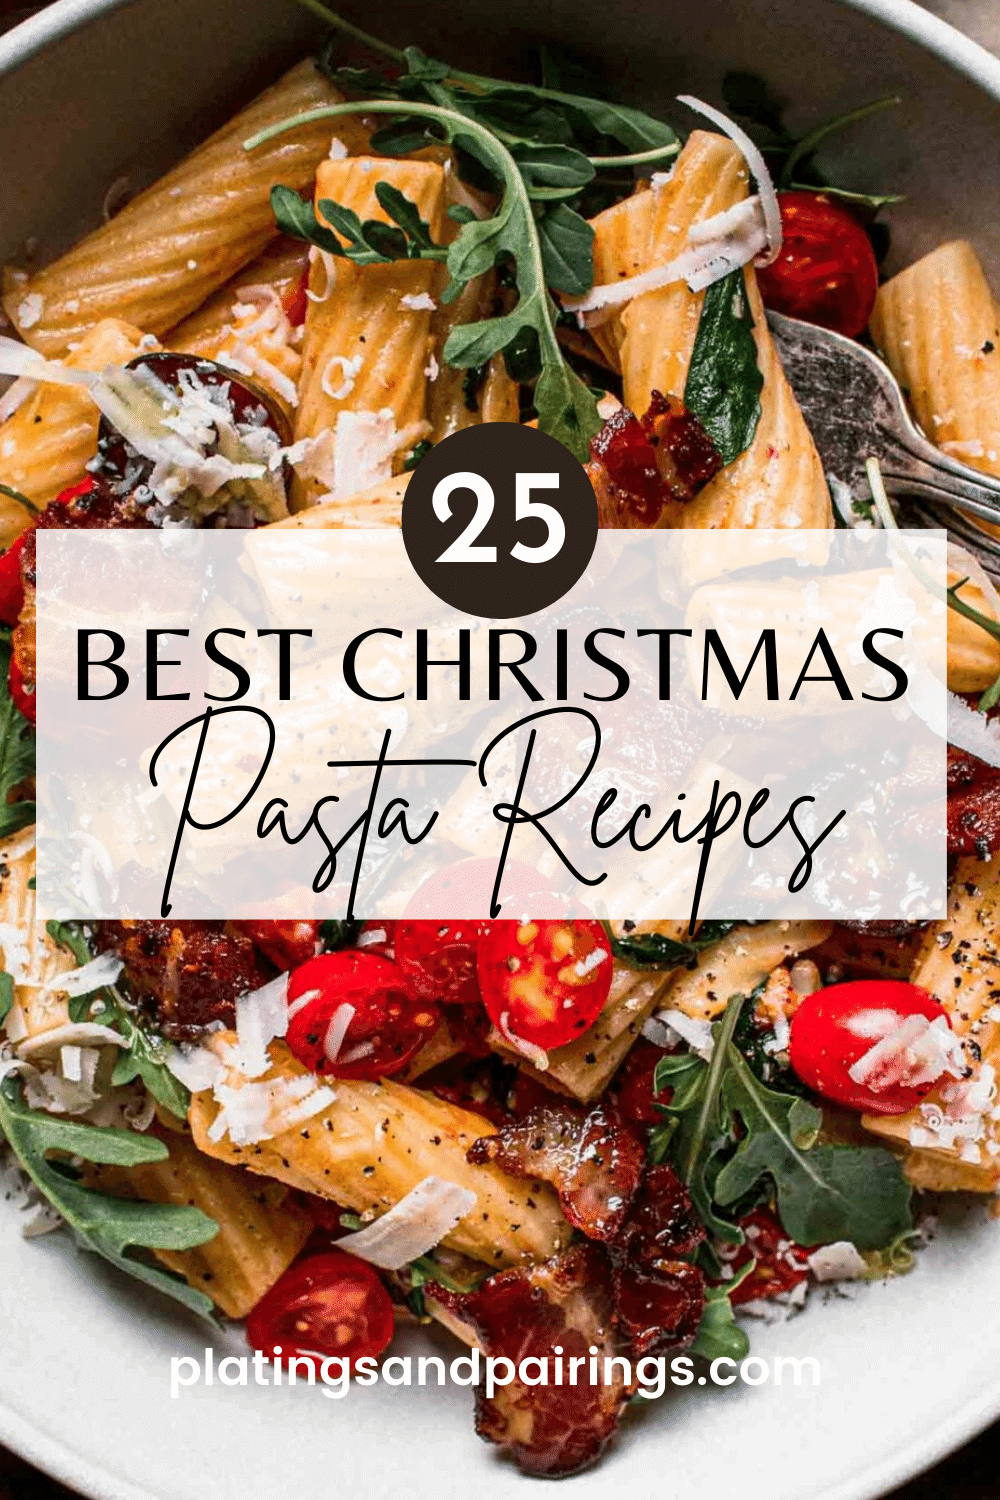 Picture of BLT pasta with text overlay - Best Christmas Pasta Recipes.